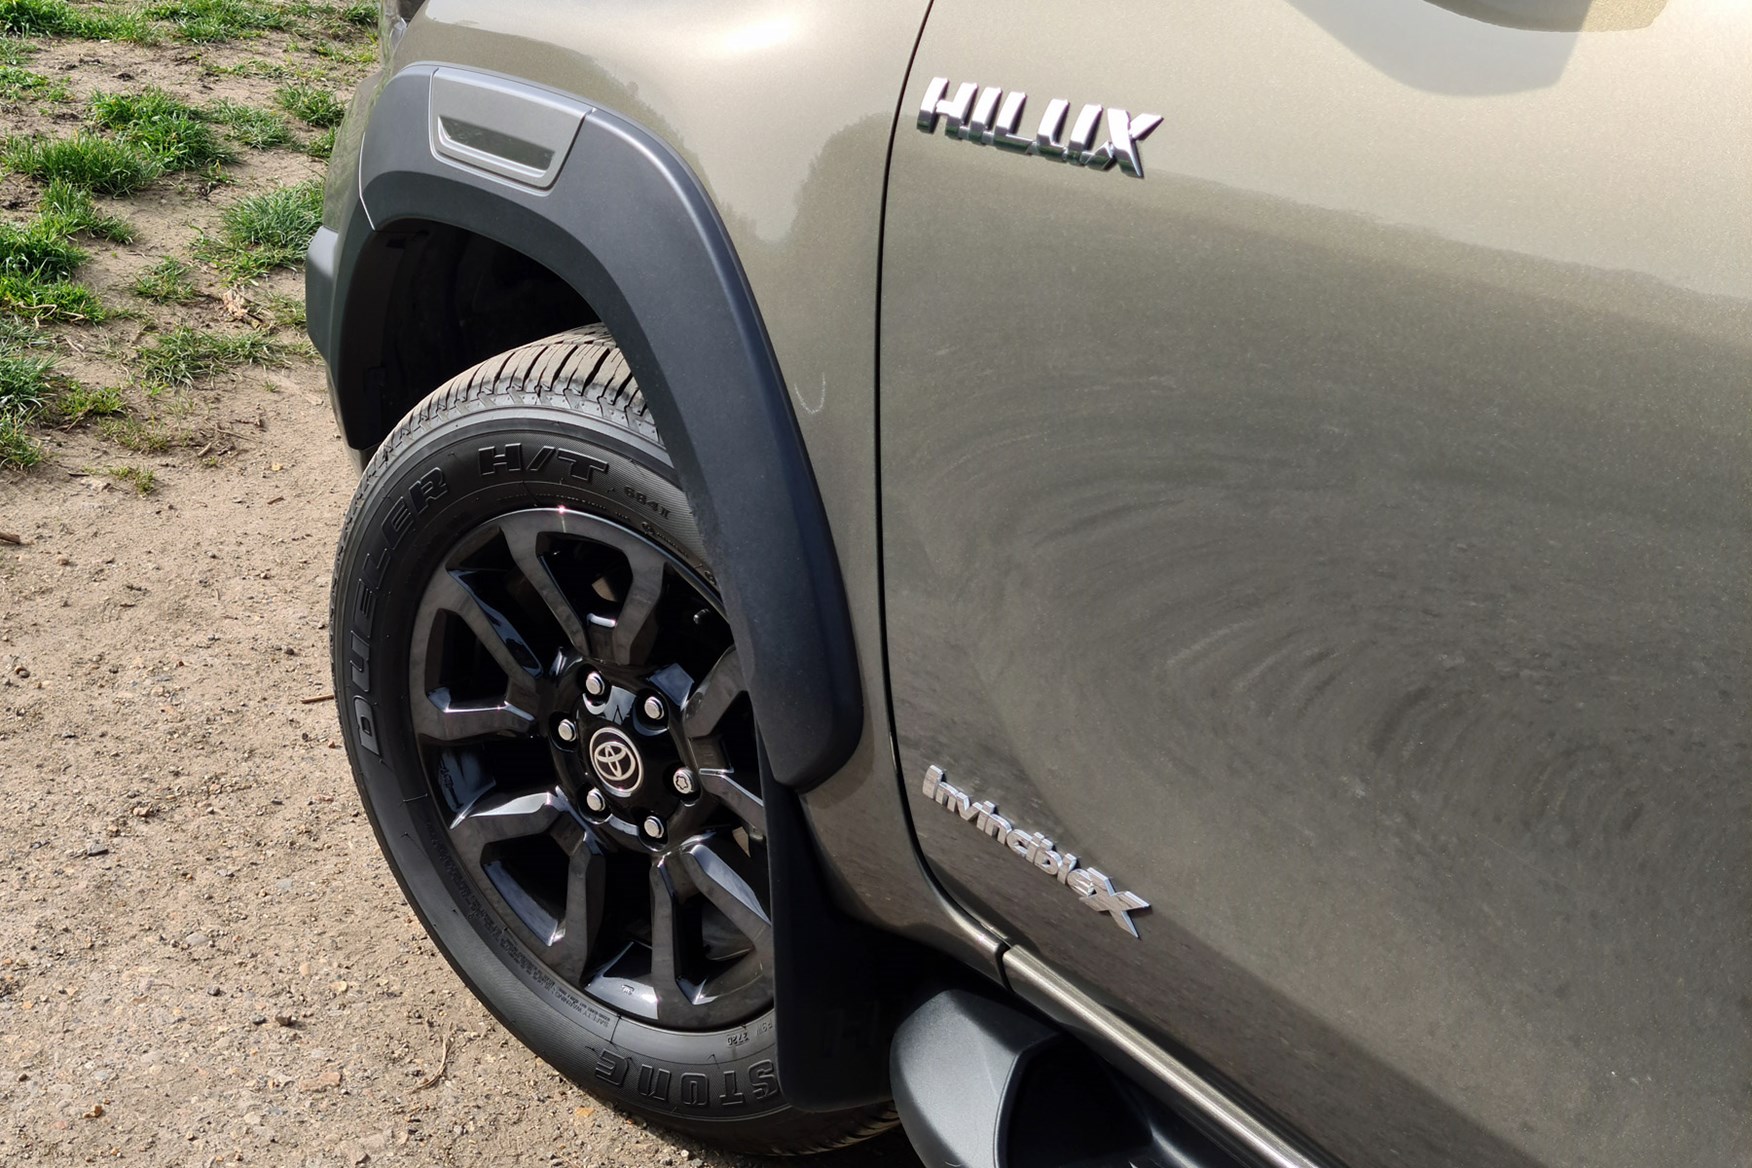 Toyota Hilux Invincible X 2.8D manual review - front wheel, badges and over-fender details